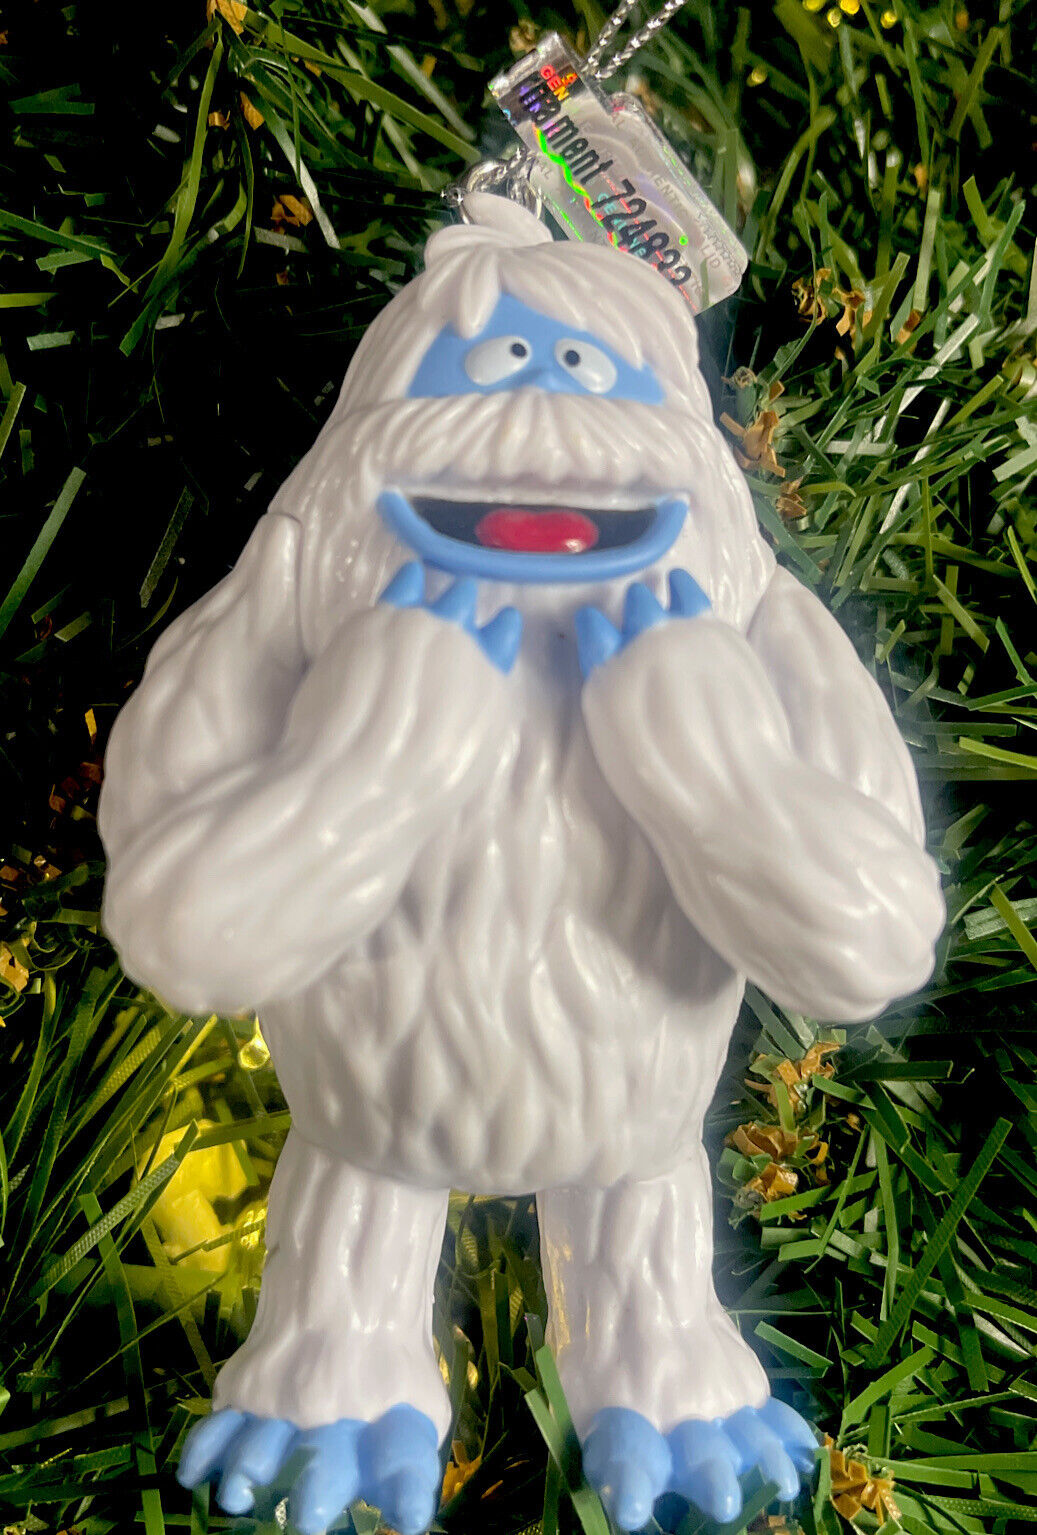 2023 Bumble Abominable Snowman Rudolph Red Nosed Reindeer Christmas Ornament